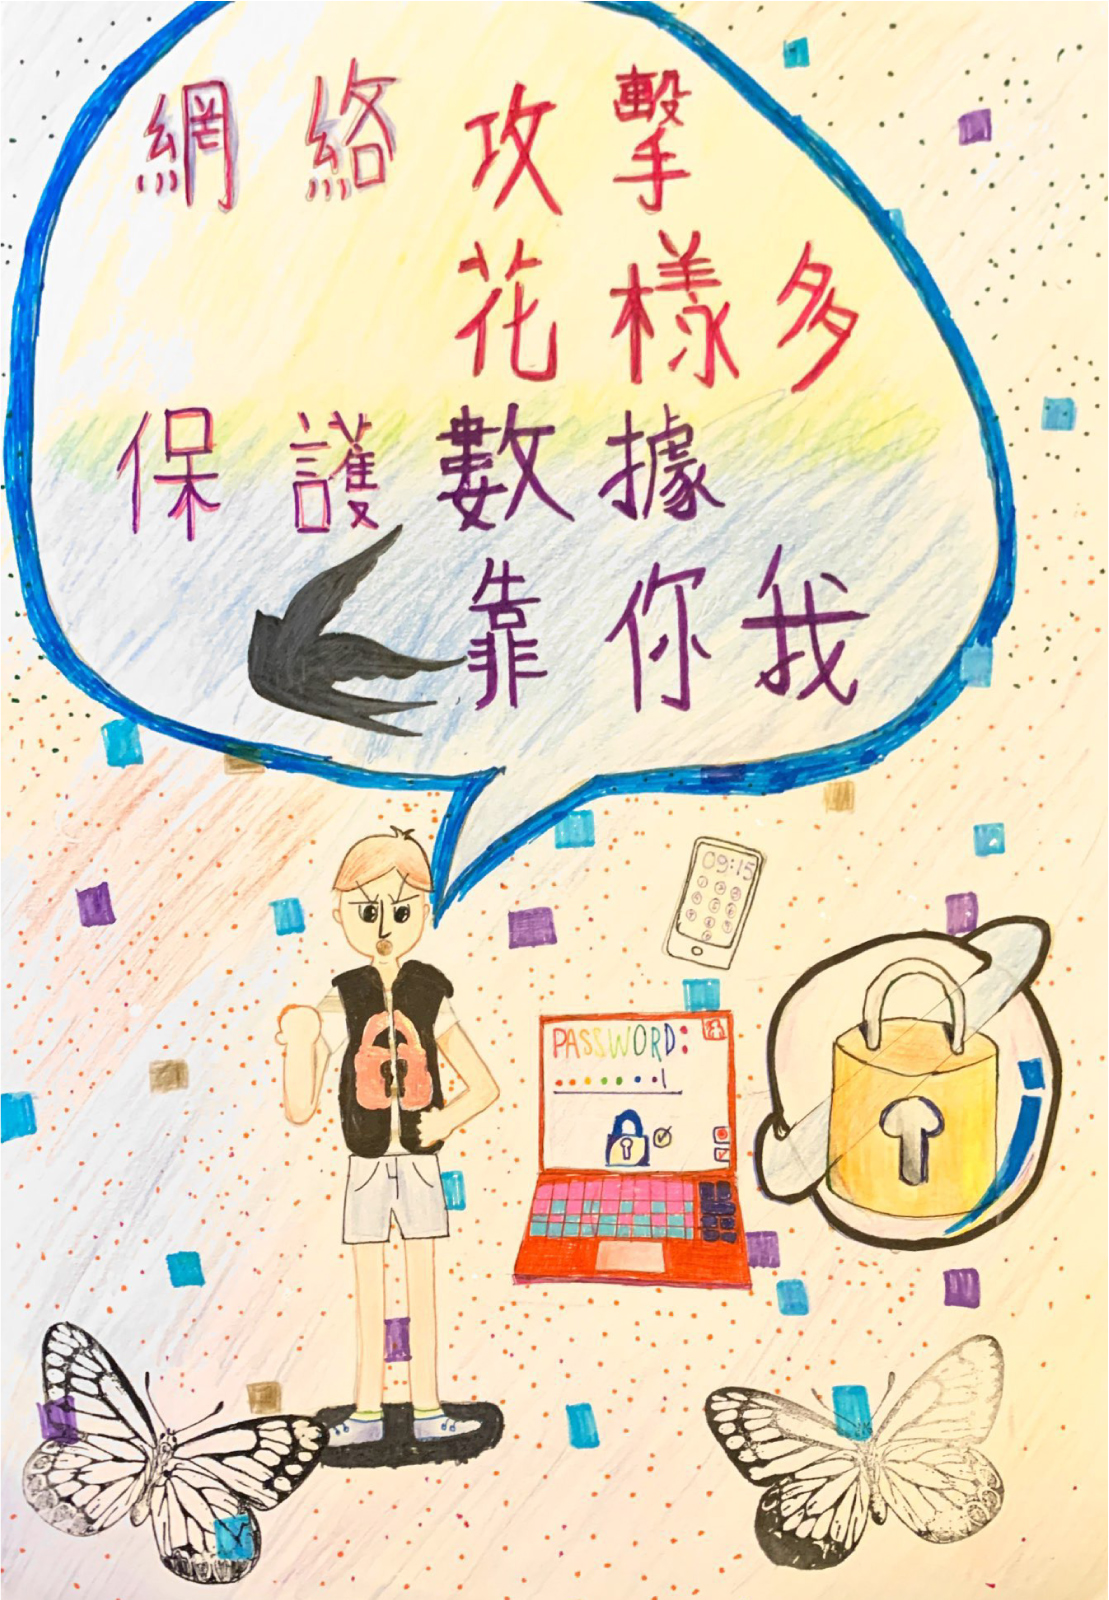 Shortlisted entry - 網路攻擊花樣多 保護數據靠你我 Tseung Lee Wai<br>So Cheuk Wing